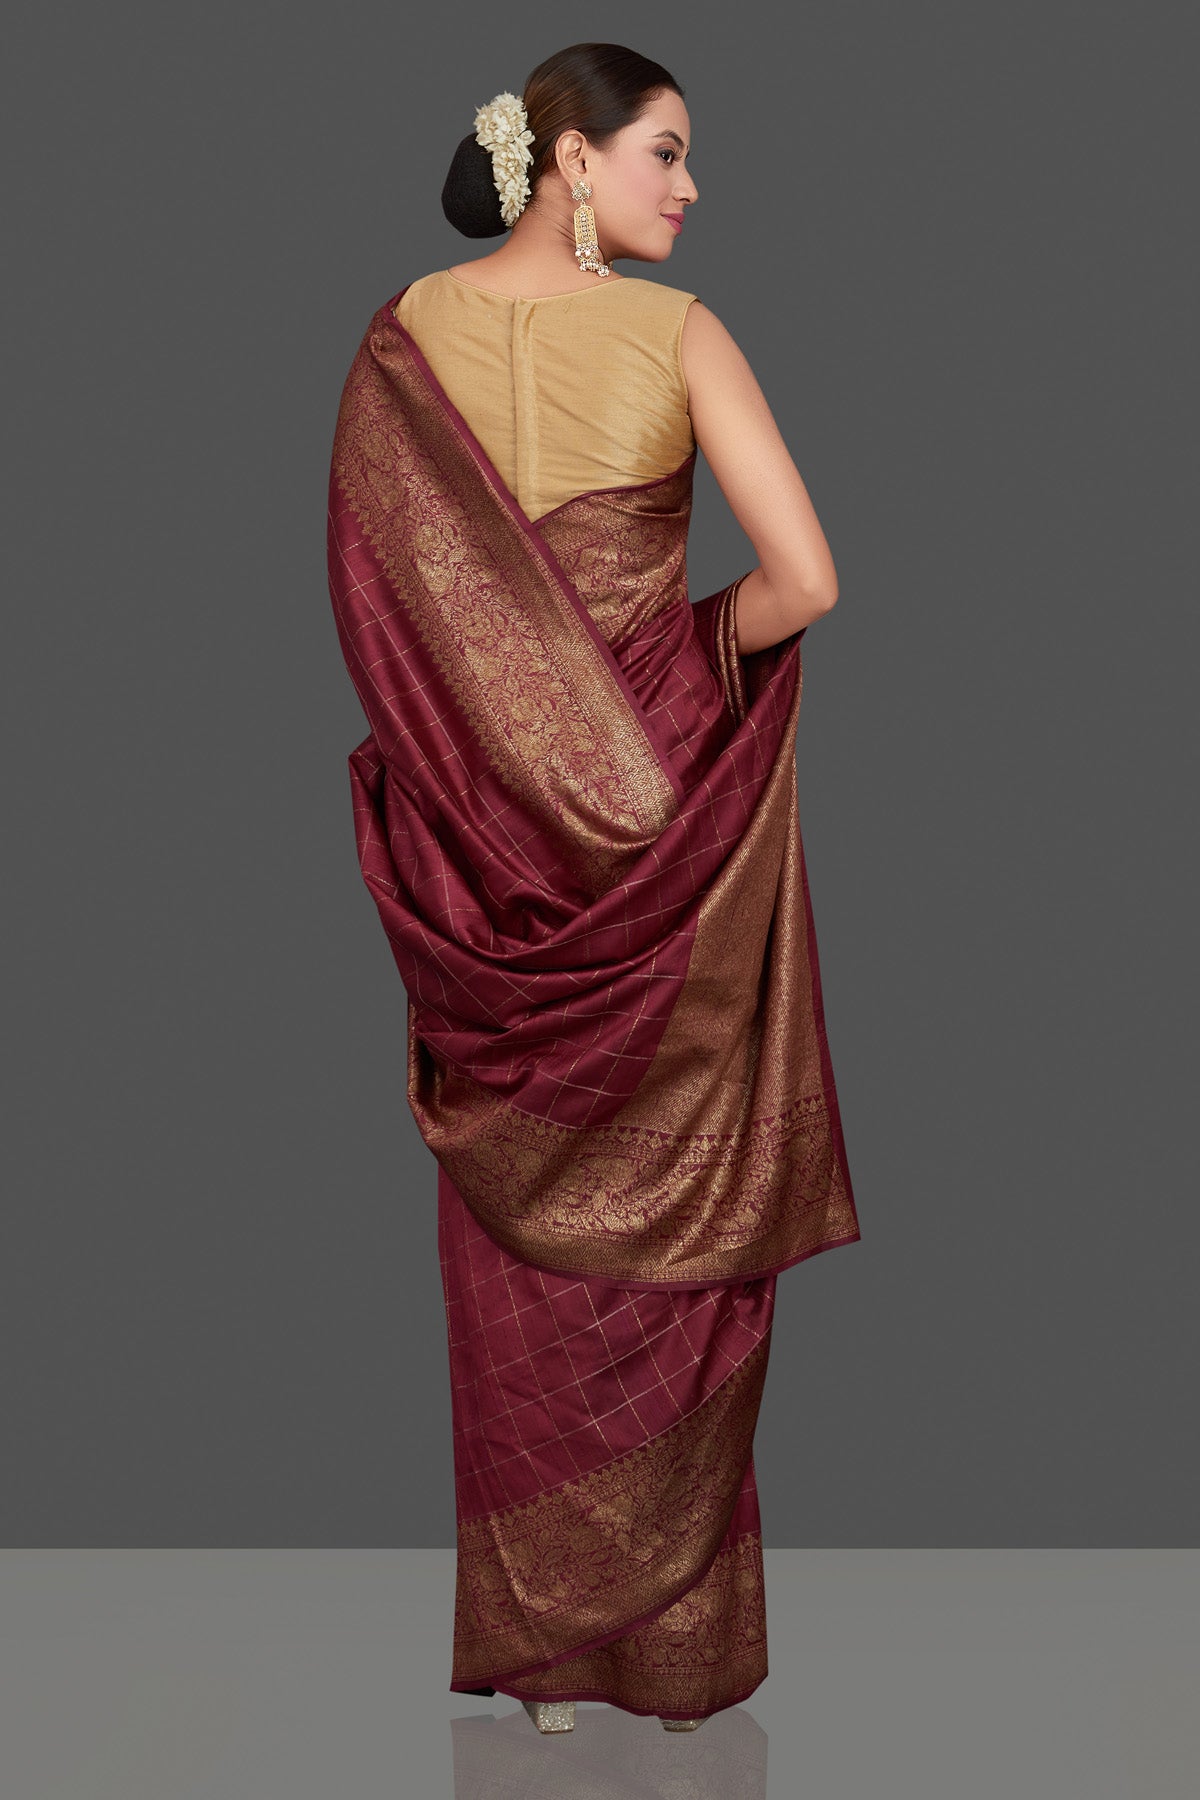 Buy gorgeous plum check tussar Banarasi saree online in USA with antique zari border. Go for stunning Indian designer sarees, georgette sarees, handwoven saris, embroidered sarees for festive occasions and weddings from Pure Elegance Indian clothing store in USA.-back